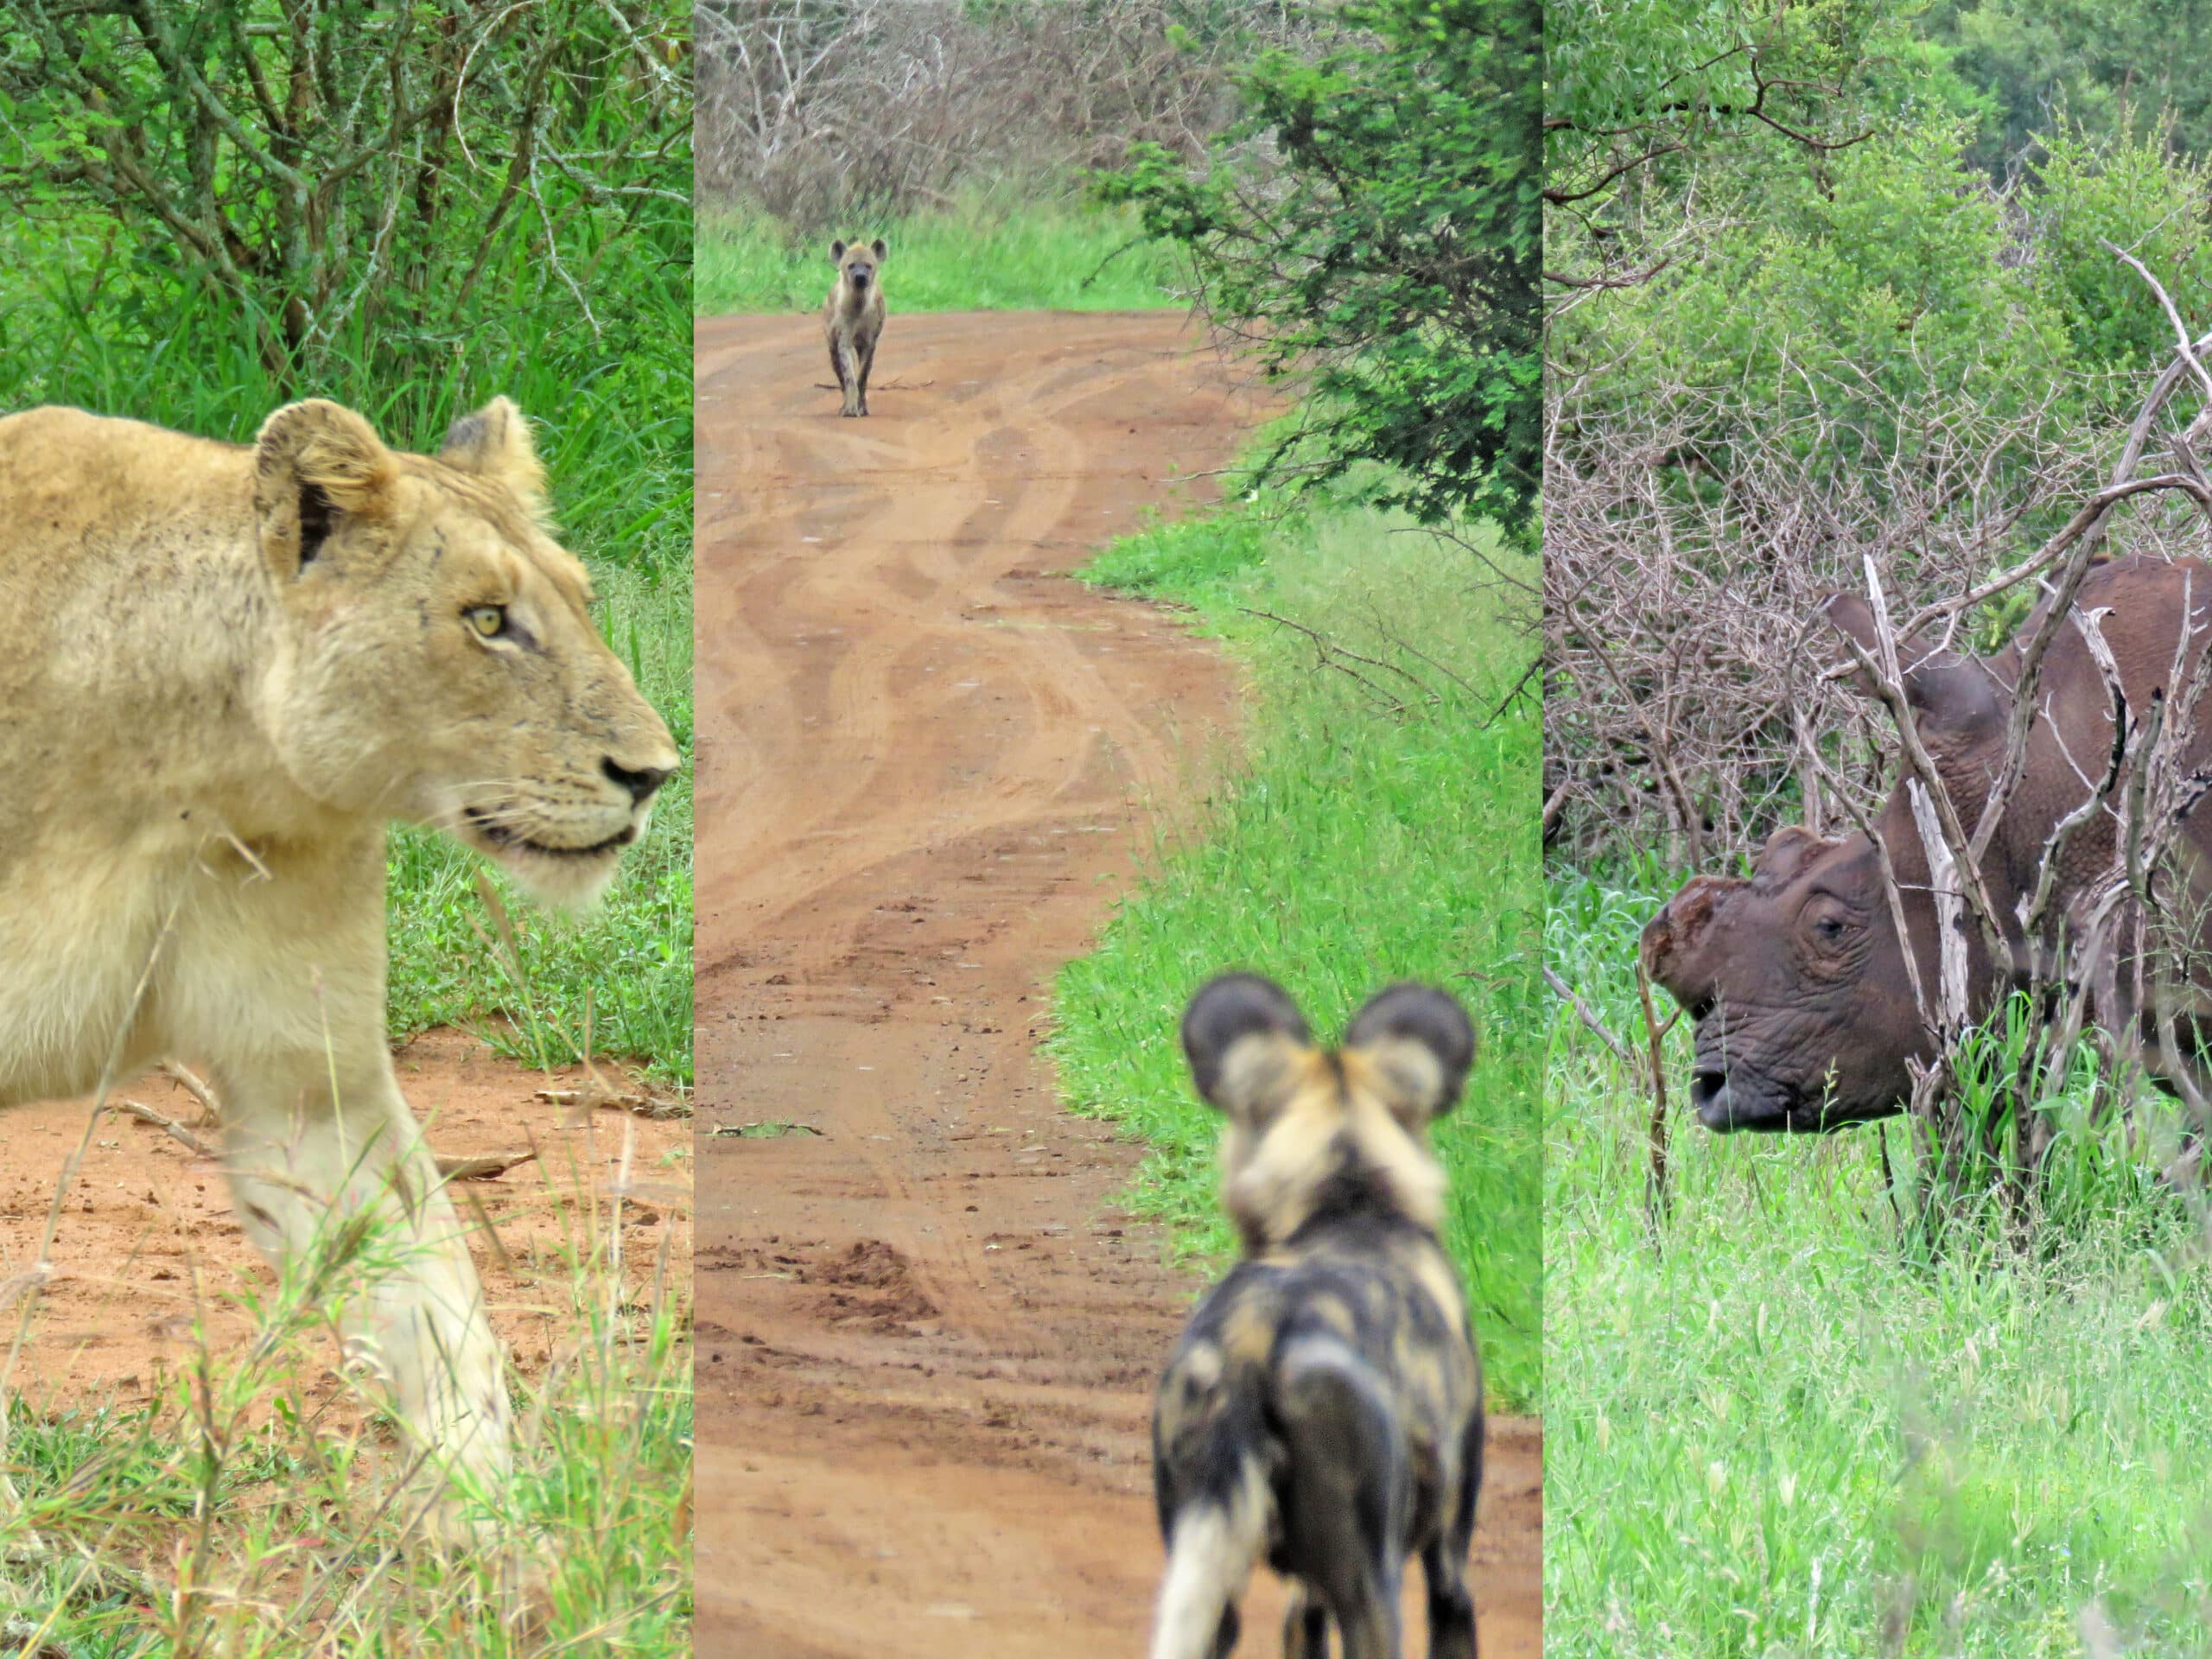 A sighting with Lions, Wild Dogs, Spotted Hyena and a rhino